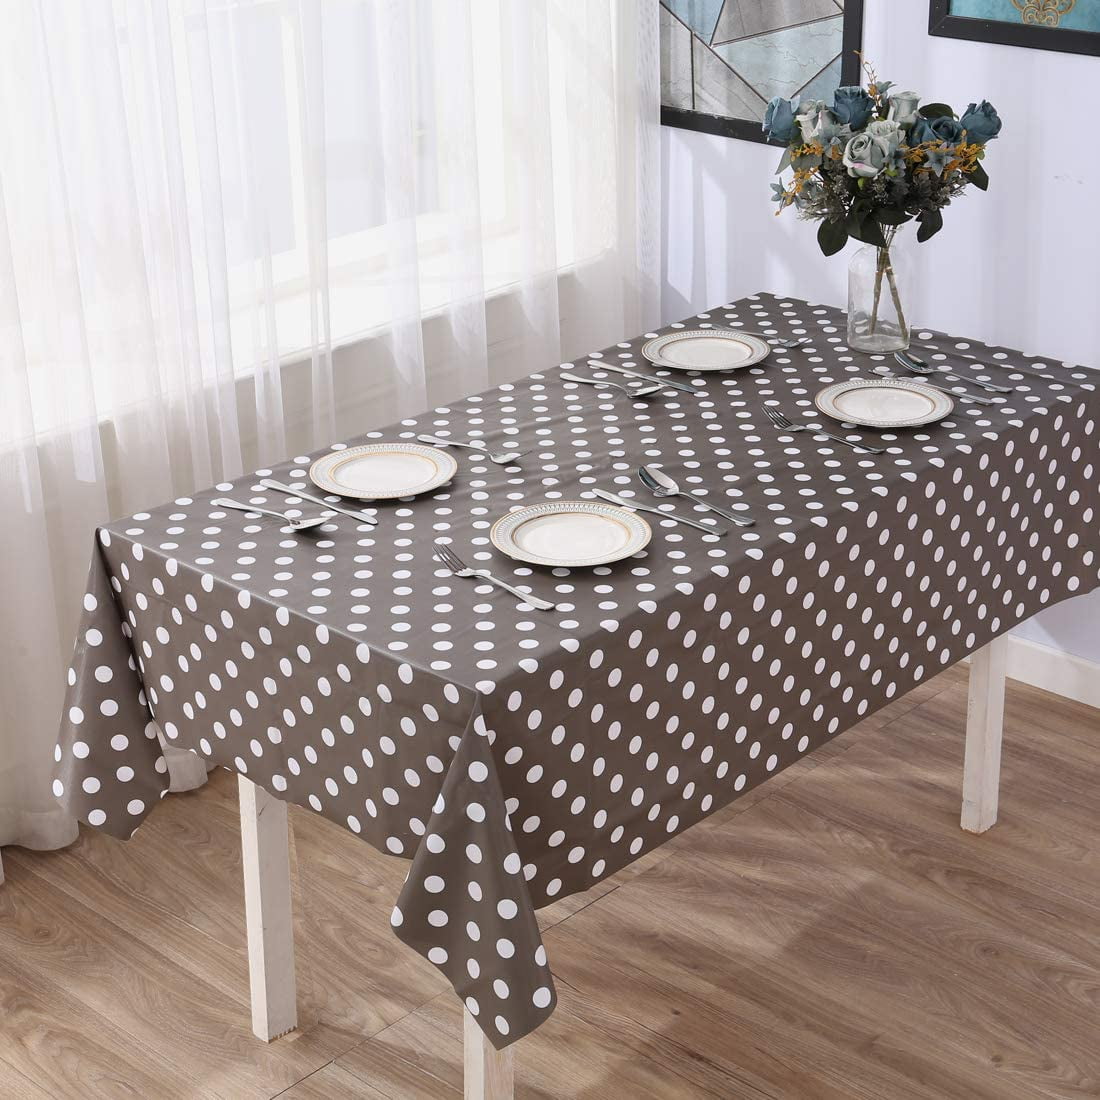 Ivory Dotted Cupcakes PVC Tablecloth Vinyl Oilcloth Kitchen Dining Table 